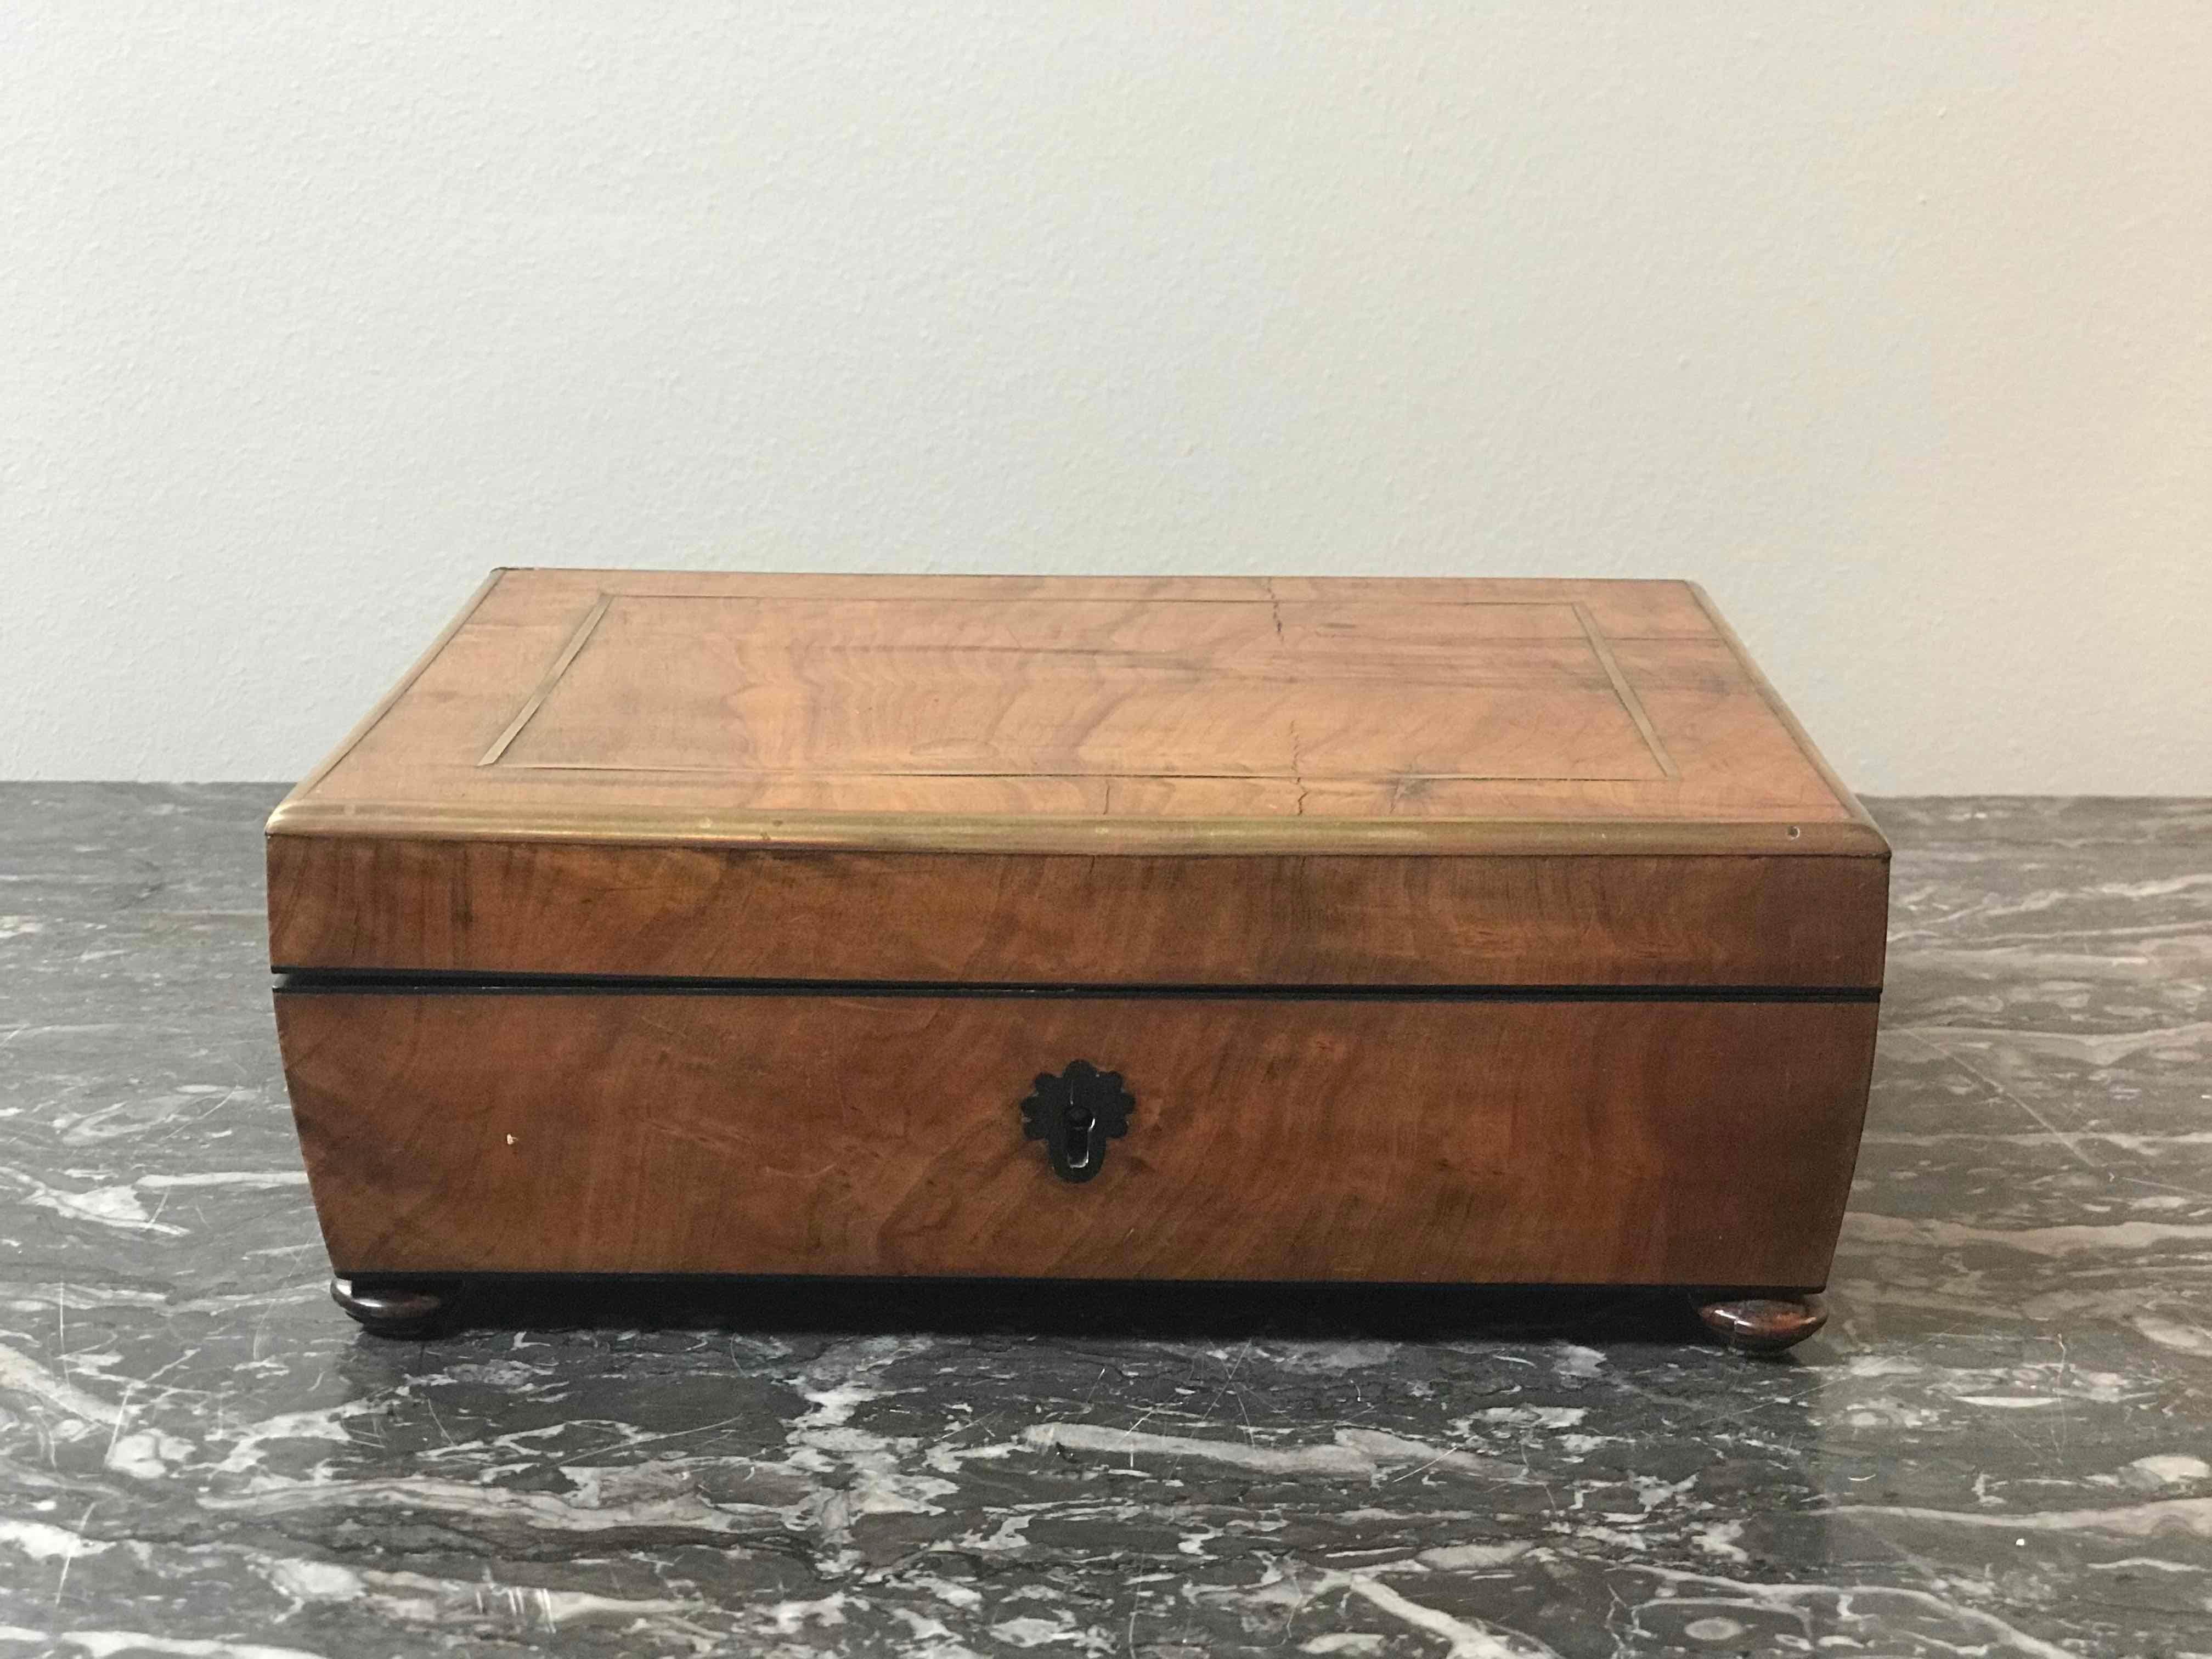 Olive wood brass inlaid box from mid-19th century England. 